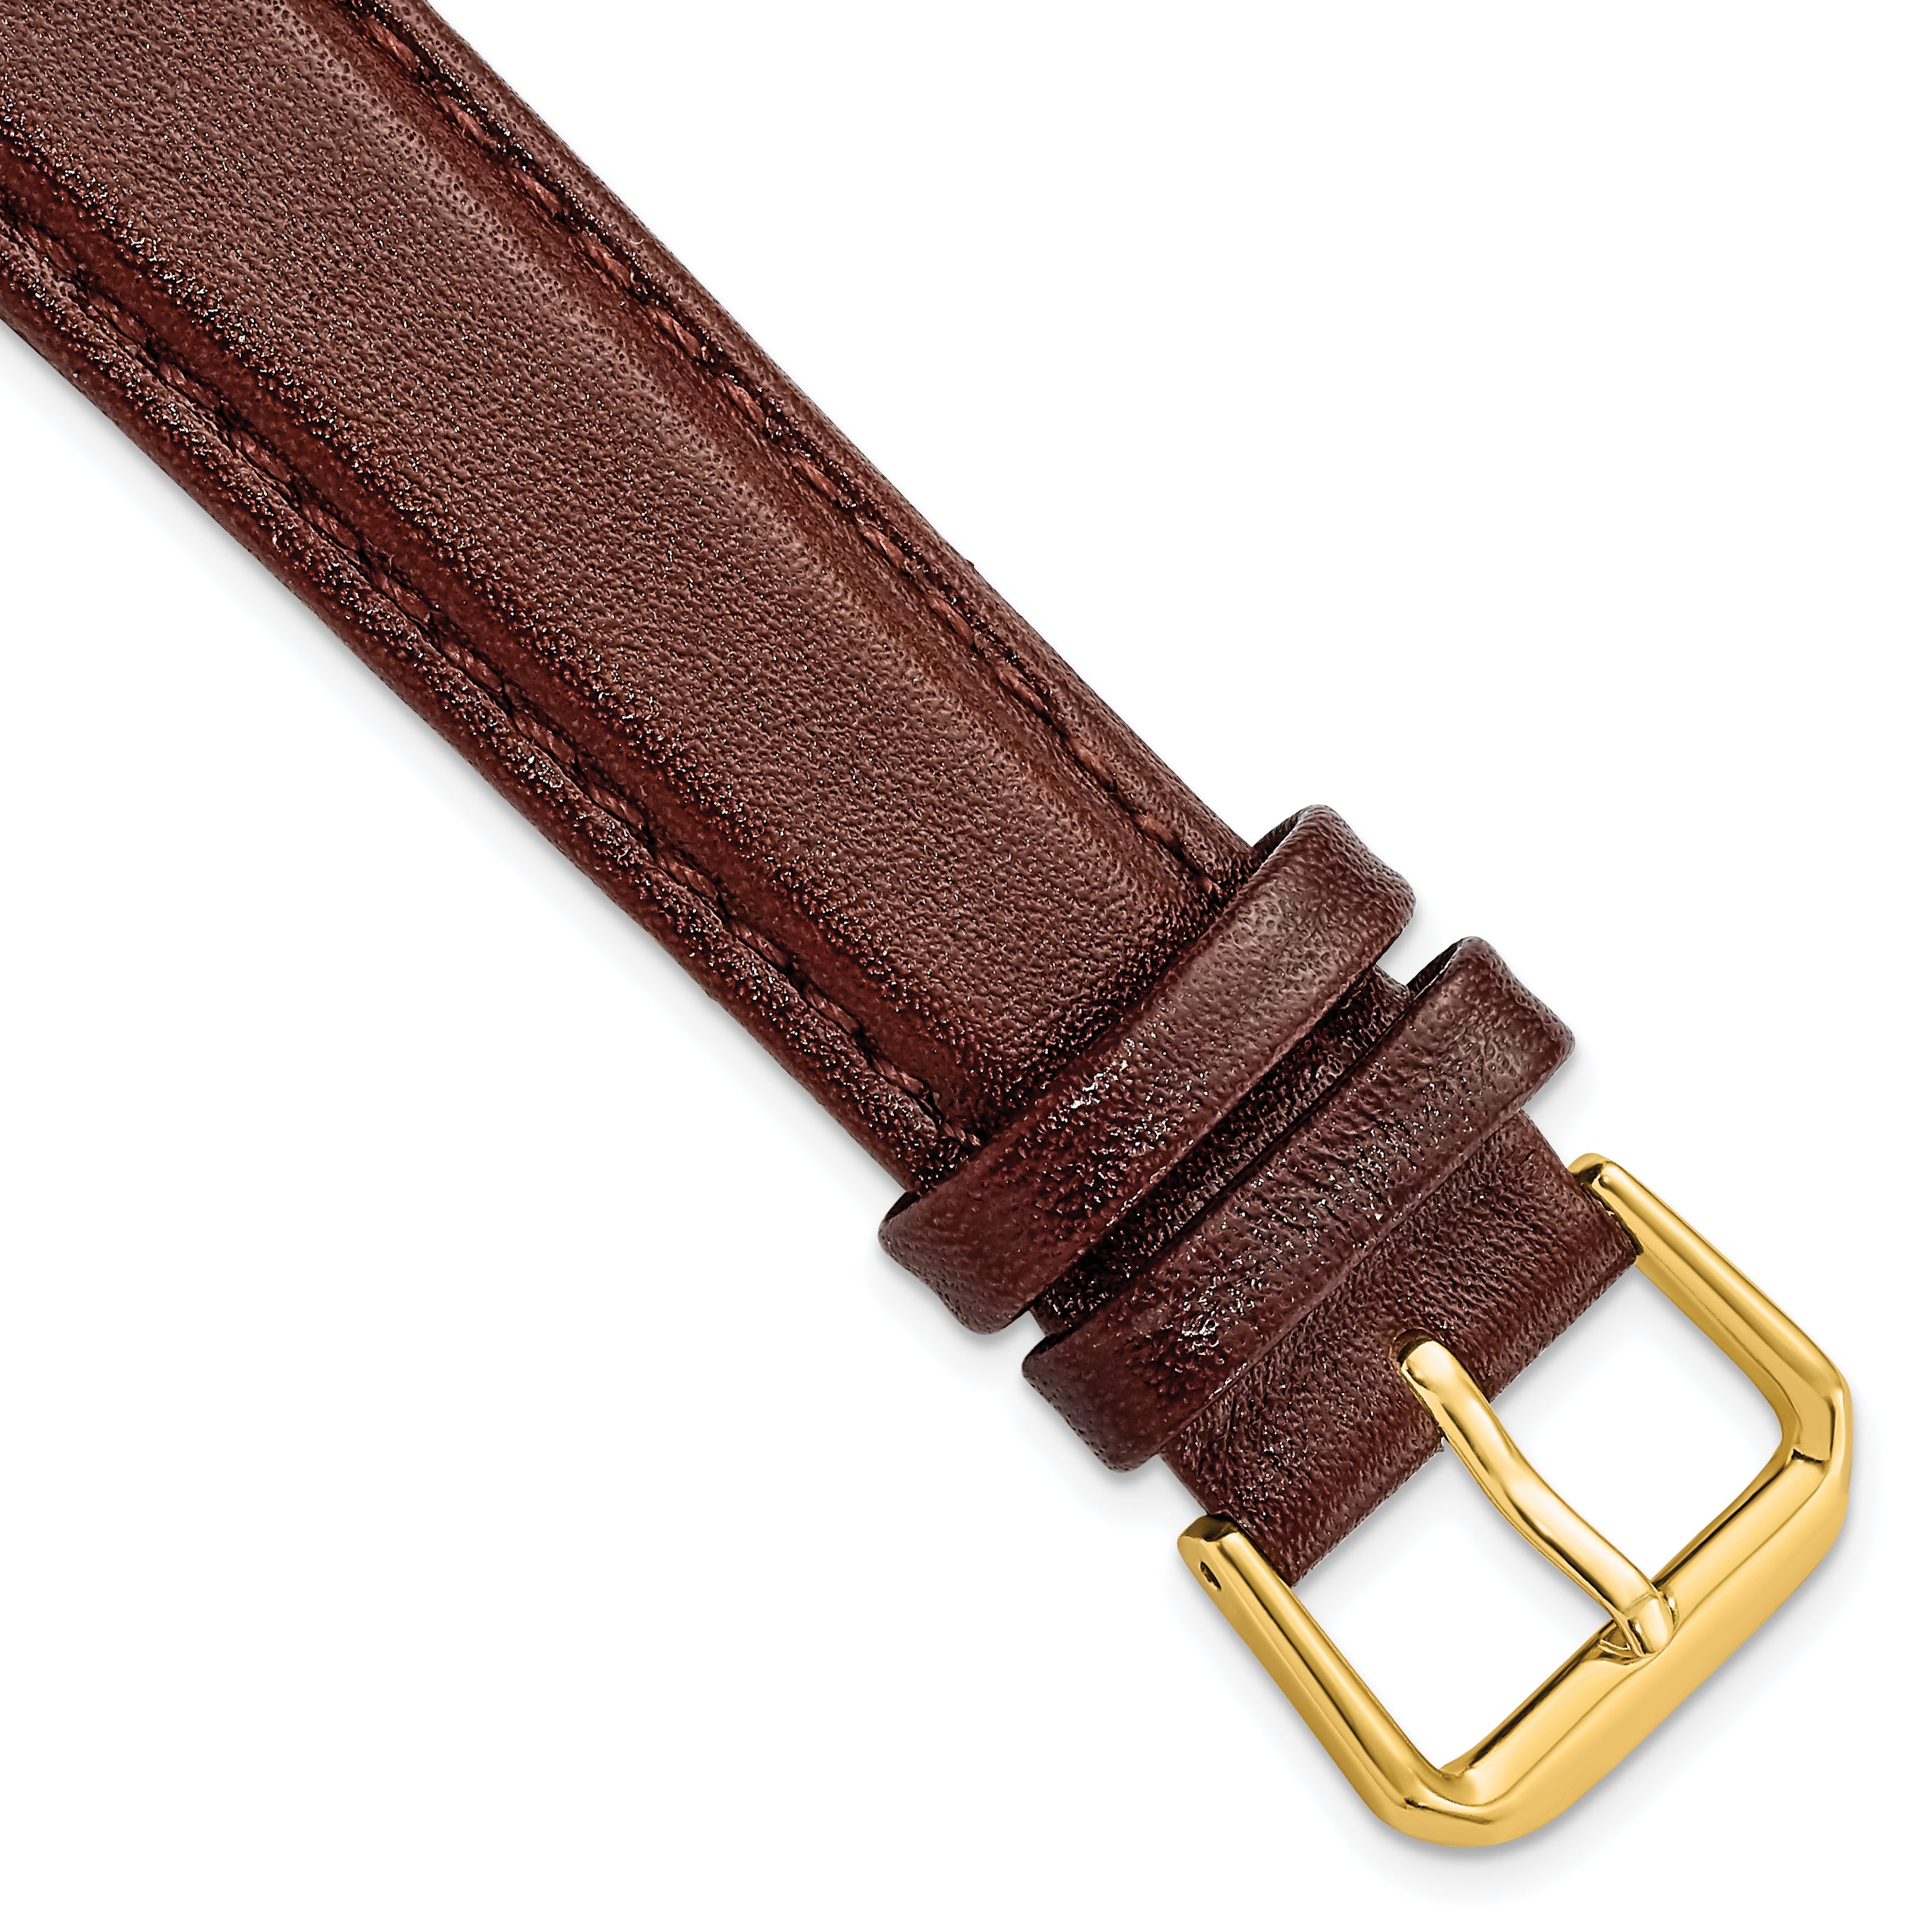 DeBeer 18mm Havana Smooth Leather with Gold-tone Buckle 7.5 inch Watch Band